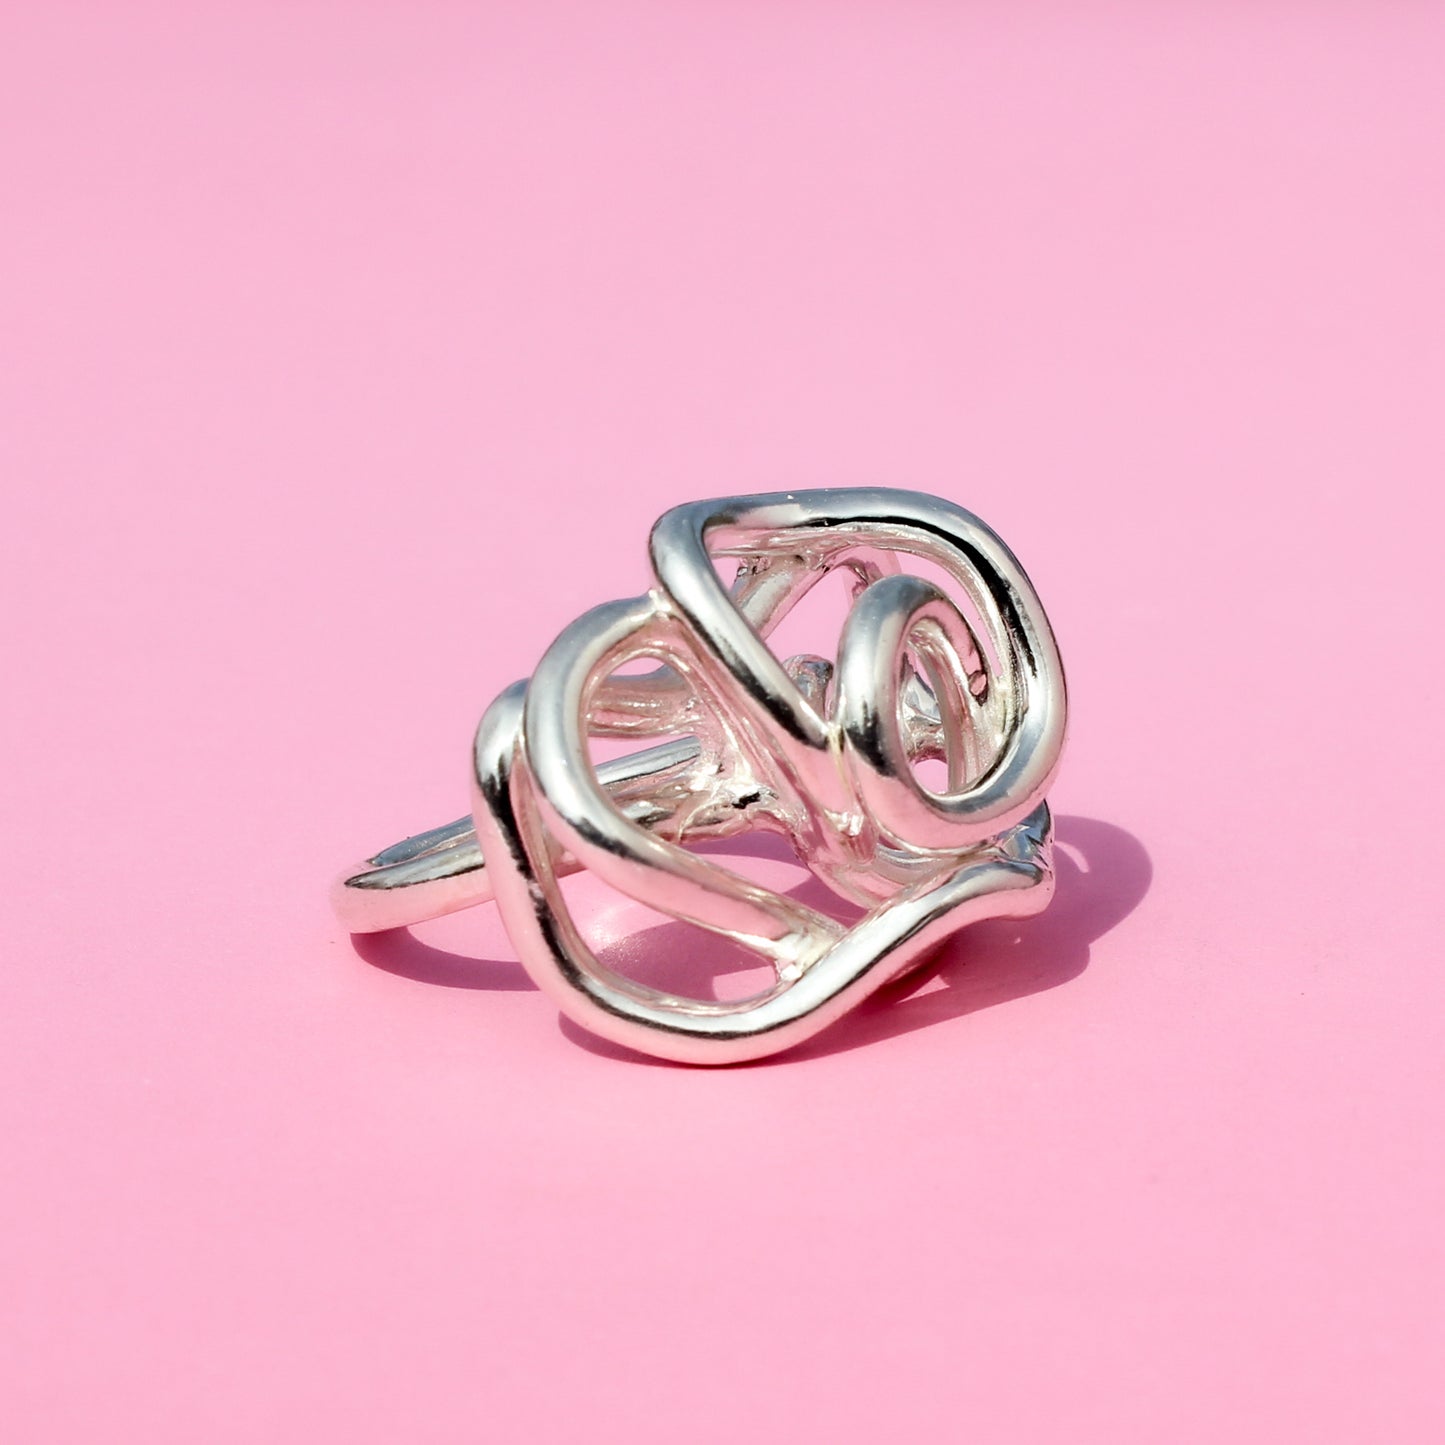 thicc sculptural ring (1 of 1)